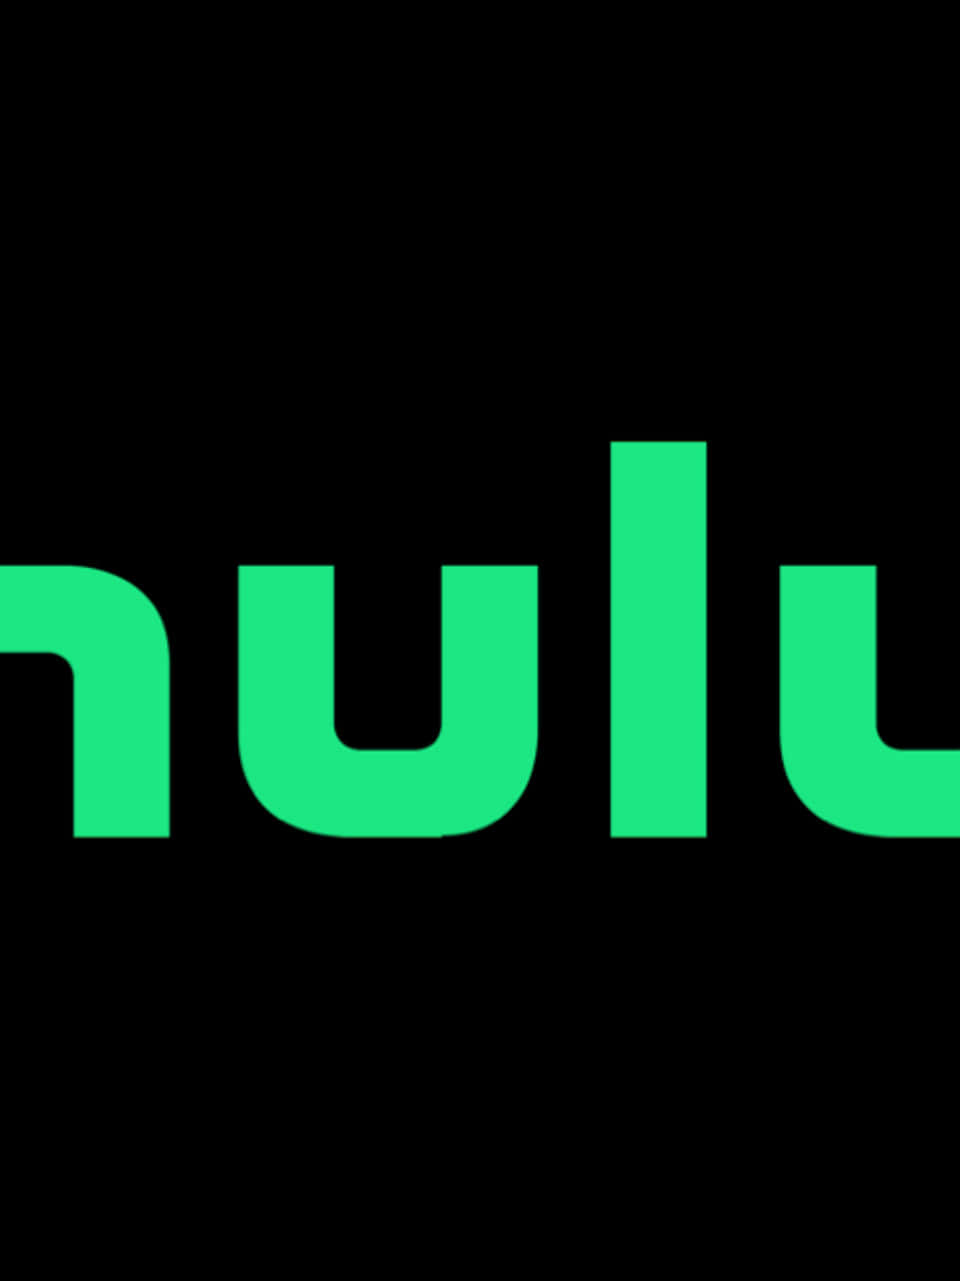 Hulu Logo With Green Letters On A Black Background